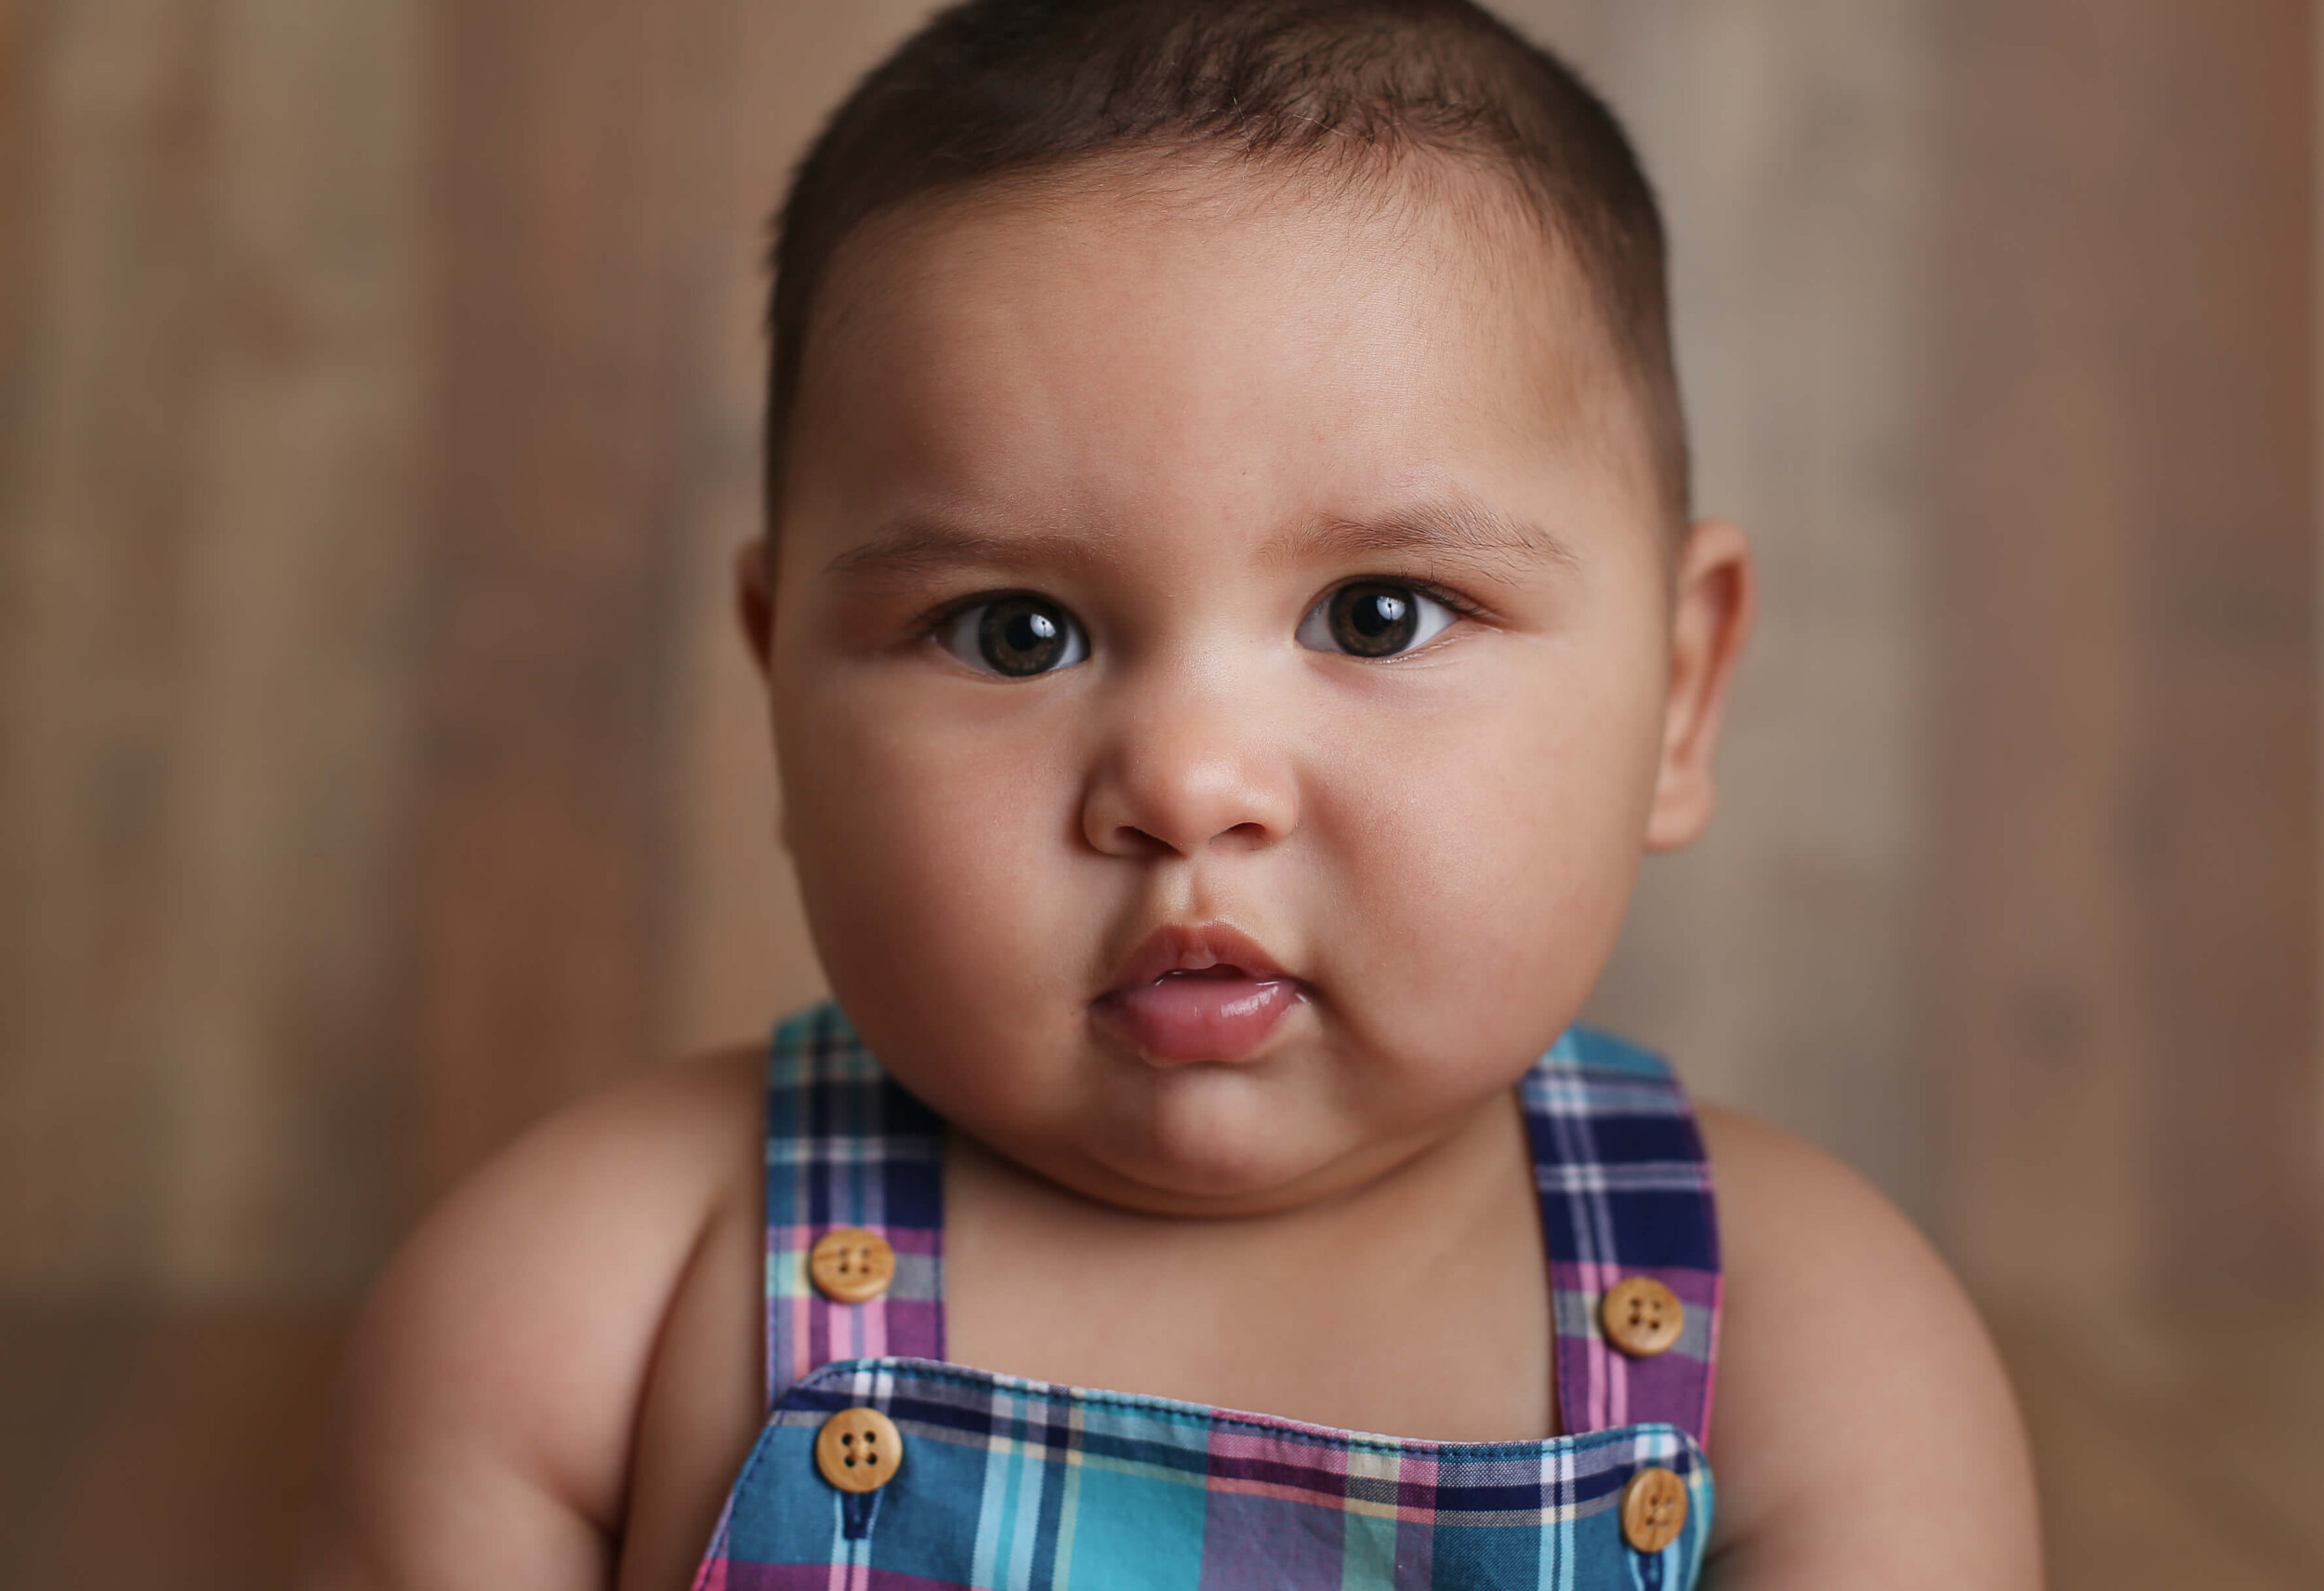  A picture of a closeup view of a cute baby boy with chubby cheeks, looking thoughtfully at the camera, showing every detail in his face as he reaches a one-year-old milestone from a baby photo session 